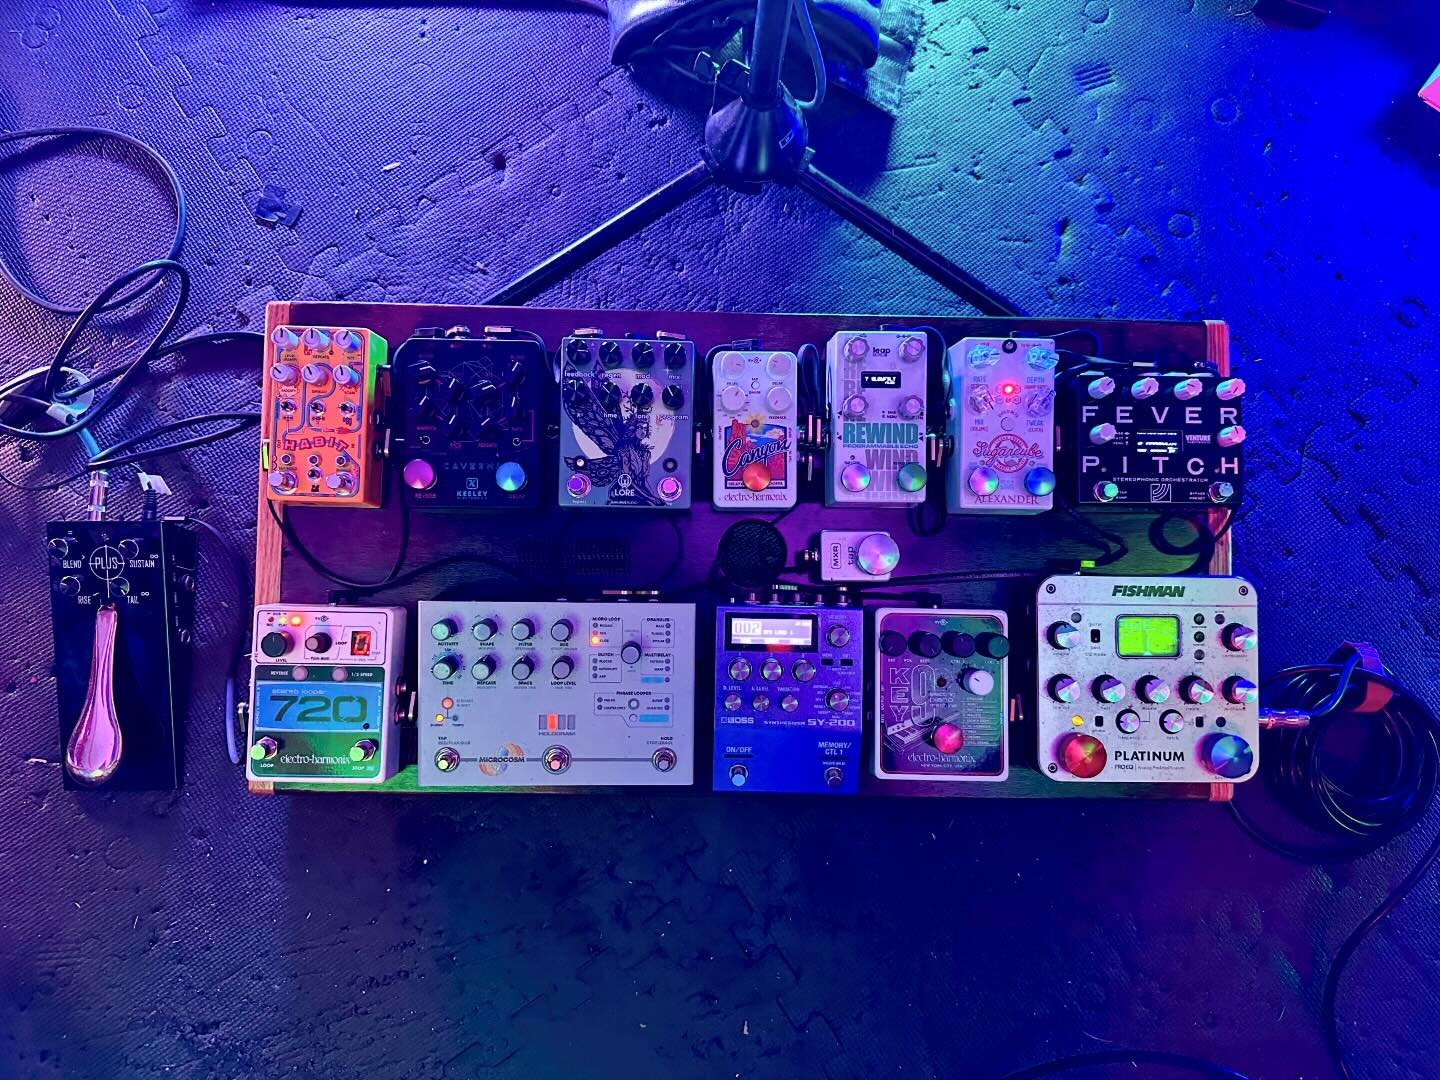 Hey now! Haven&rsquo;t done one of these in a while, here&rsquo;s an obligatory signal chain/rig photo. Some new pedals have been swapped in @bossinfoglobal SY-200, @walrusaudioeffects Lore &amp; @chasebliss Habit We&rsquo;re going to go to the outer